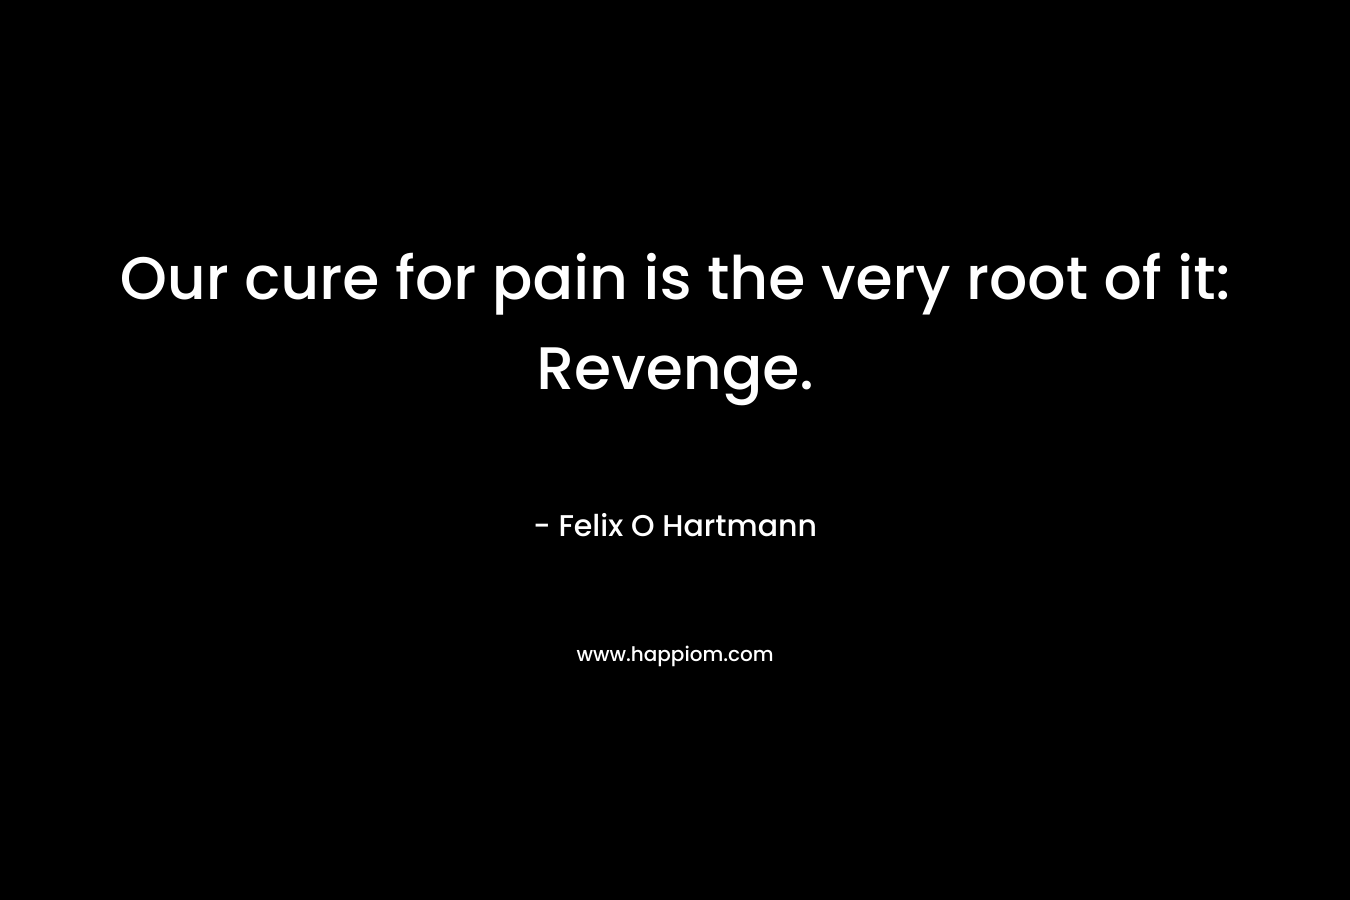 Our cure for pain is the very root of it: Revenge.